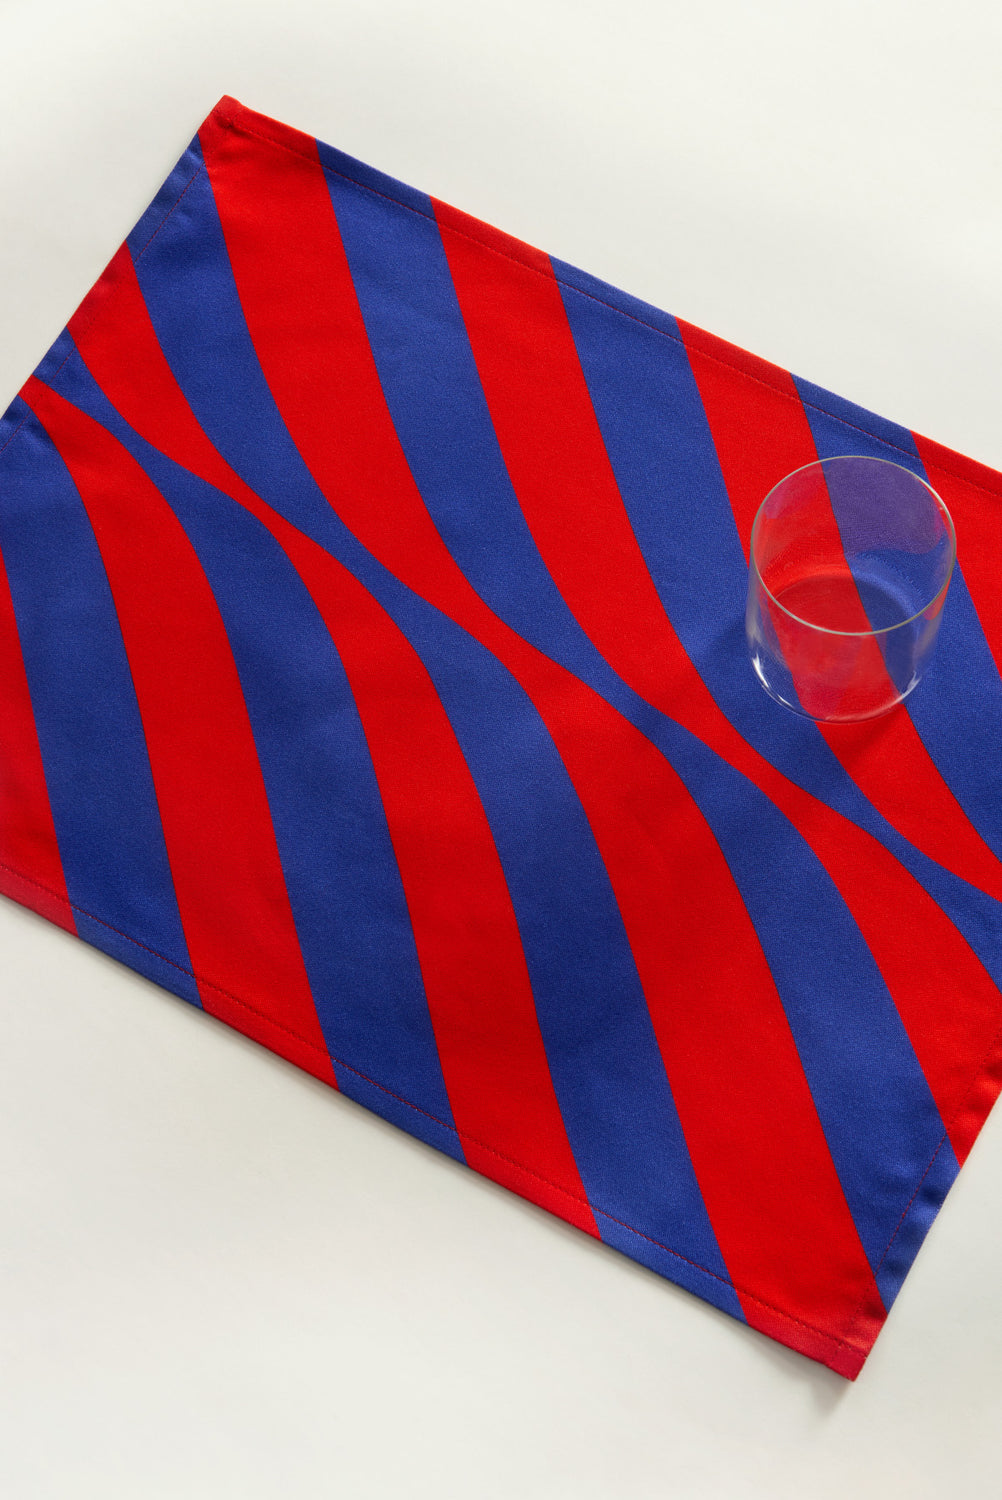 TWISTED STRIPES PLACEMATS